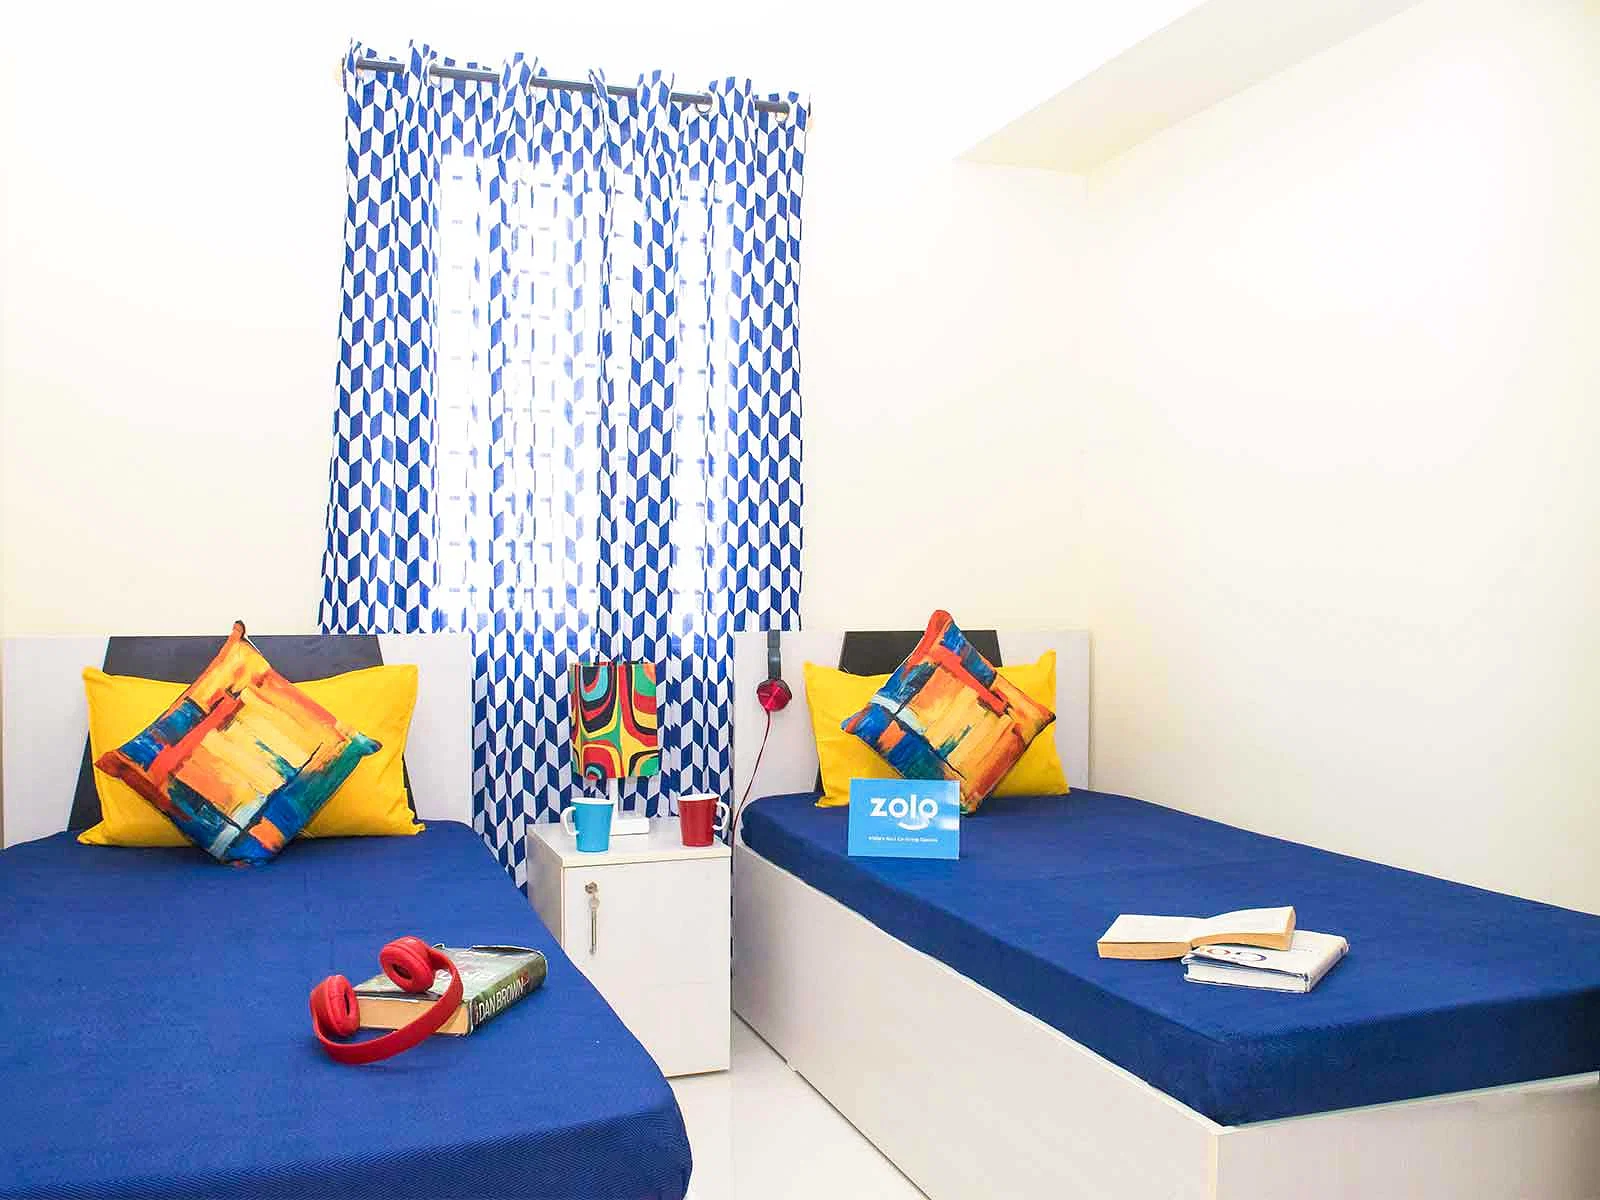 budget-friendly PGs and hostels for couple with single rooms with daily hopusekeeping-Zolo Selene